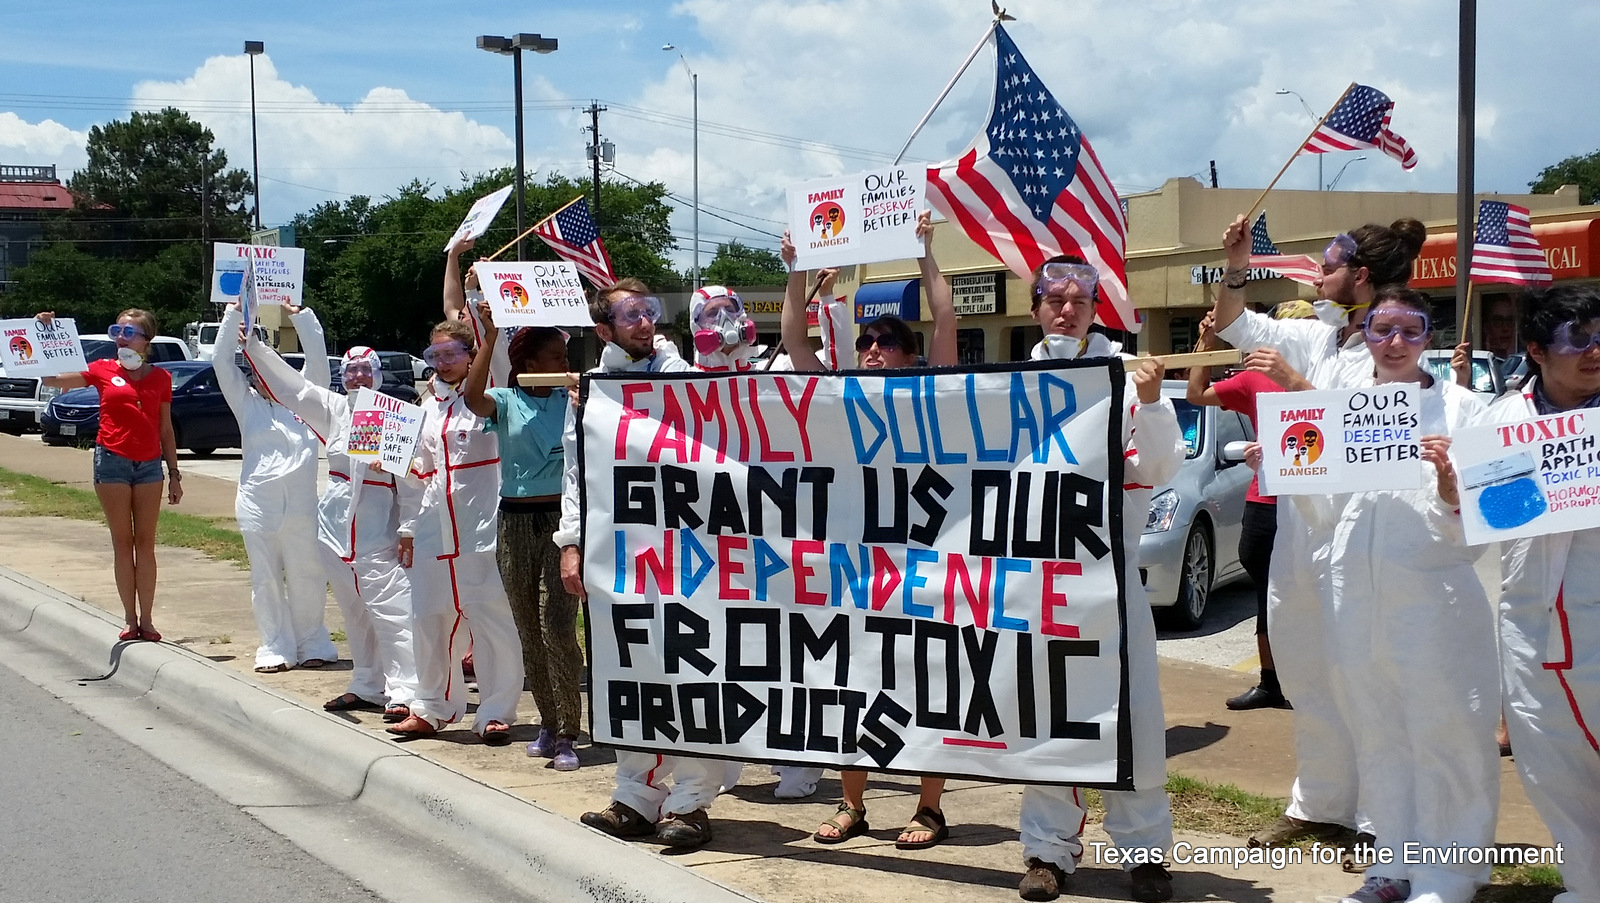 Protesters in hazardous material-handling suits gathered at a Family Dollar discount store in Austin, Texas 